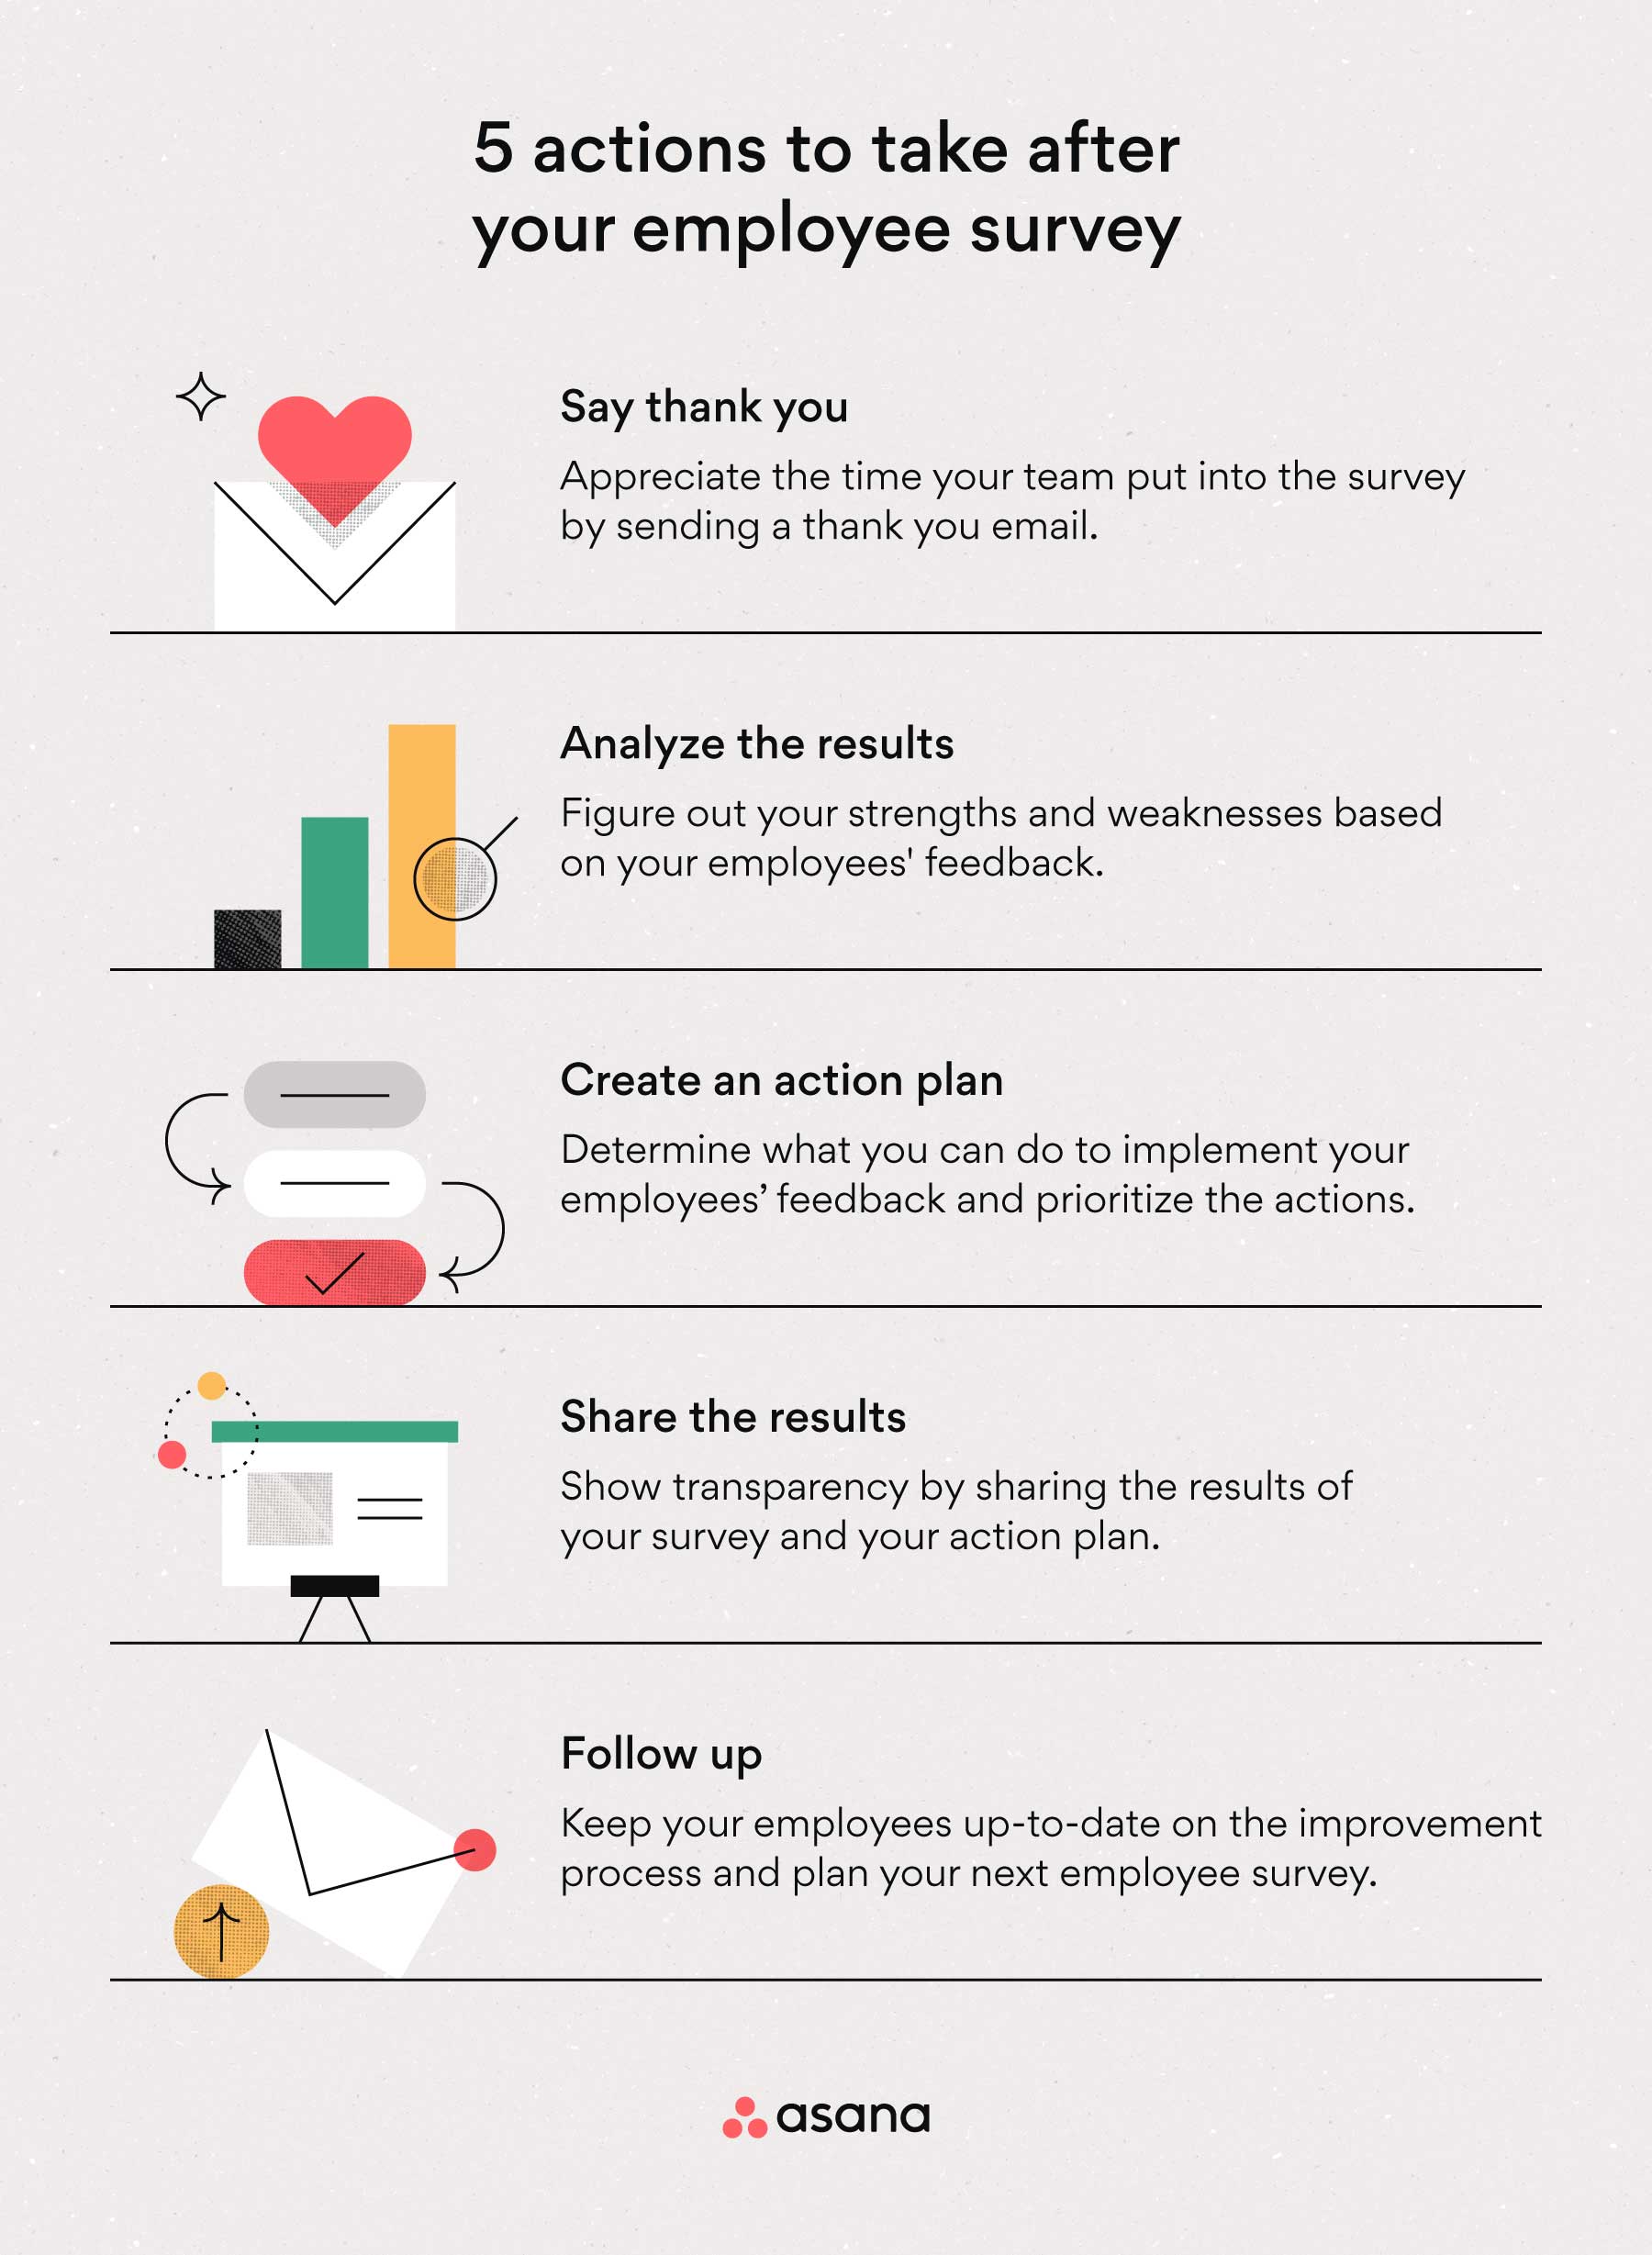 [inline illustration] 5 actions to take after your employee survey (infographic)